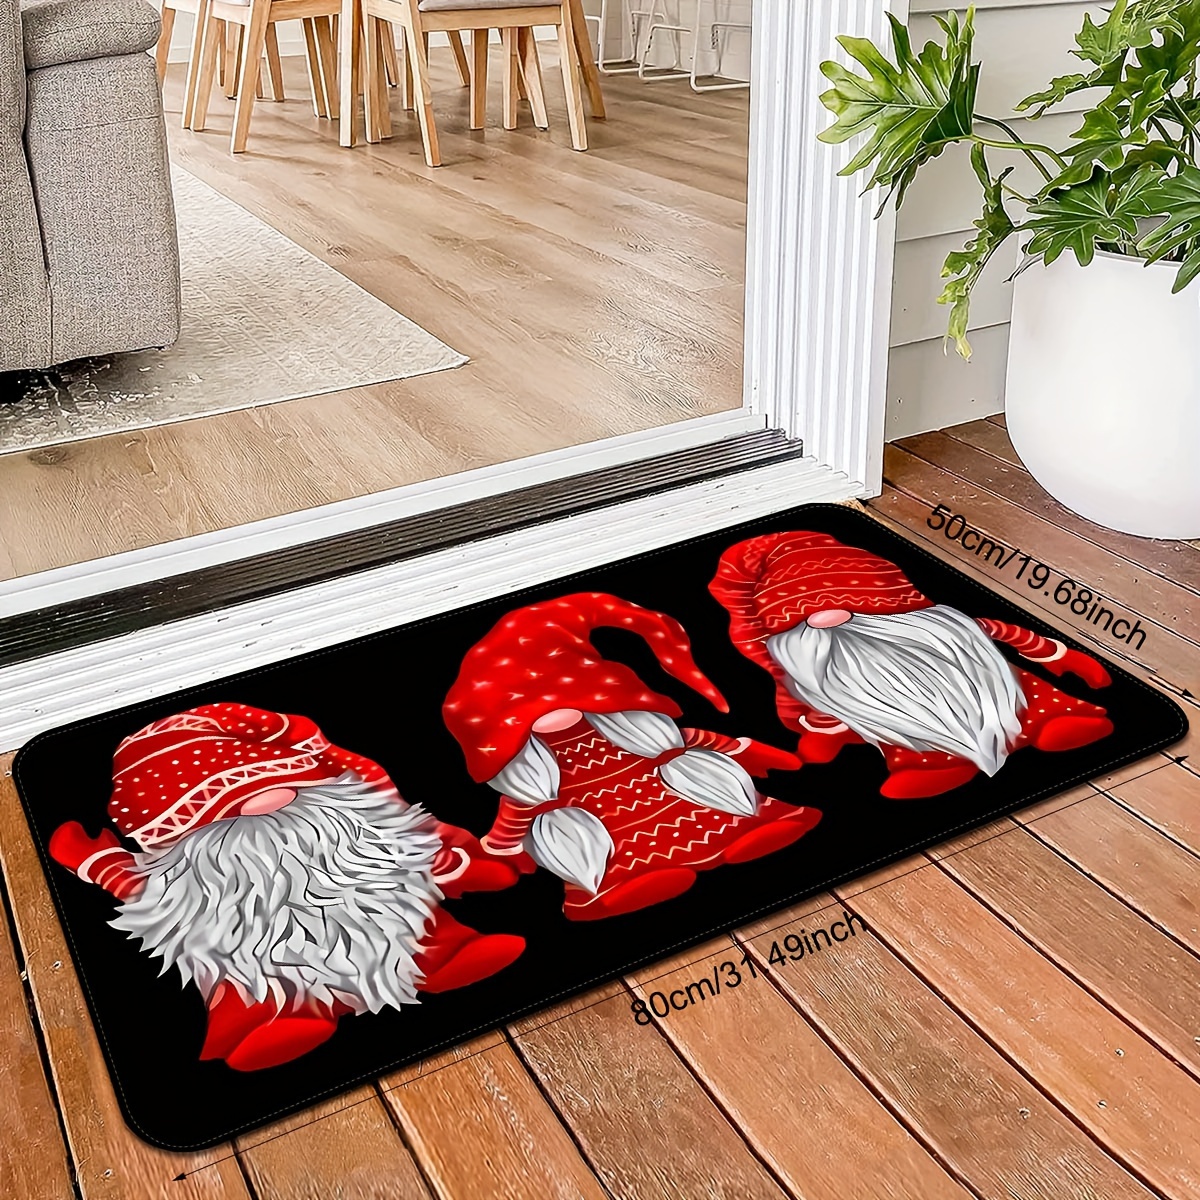 Merry Christmas Gnome Doormat Xmas Holiday Welcome Floor Mat Rugs